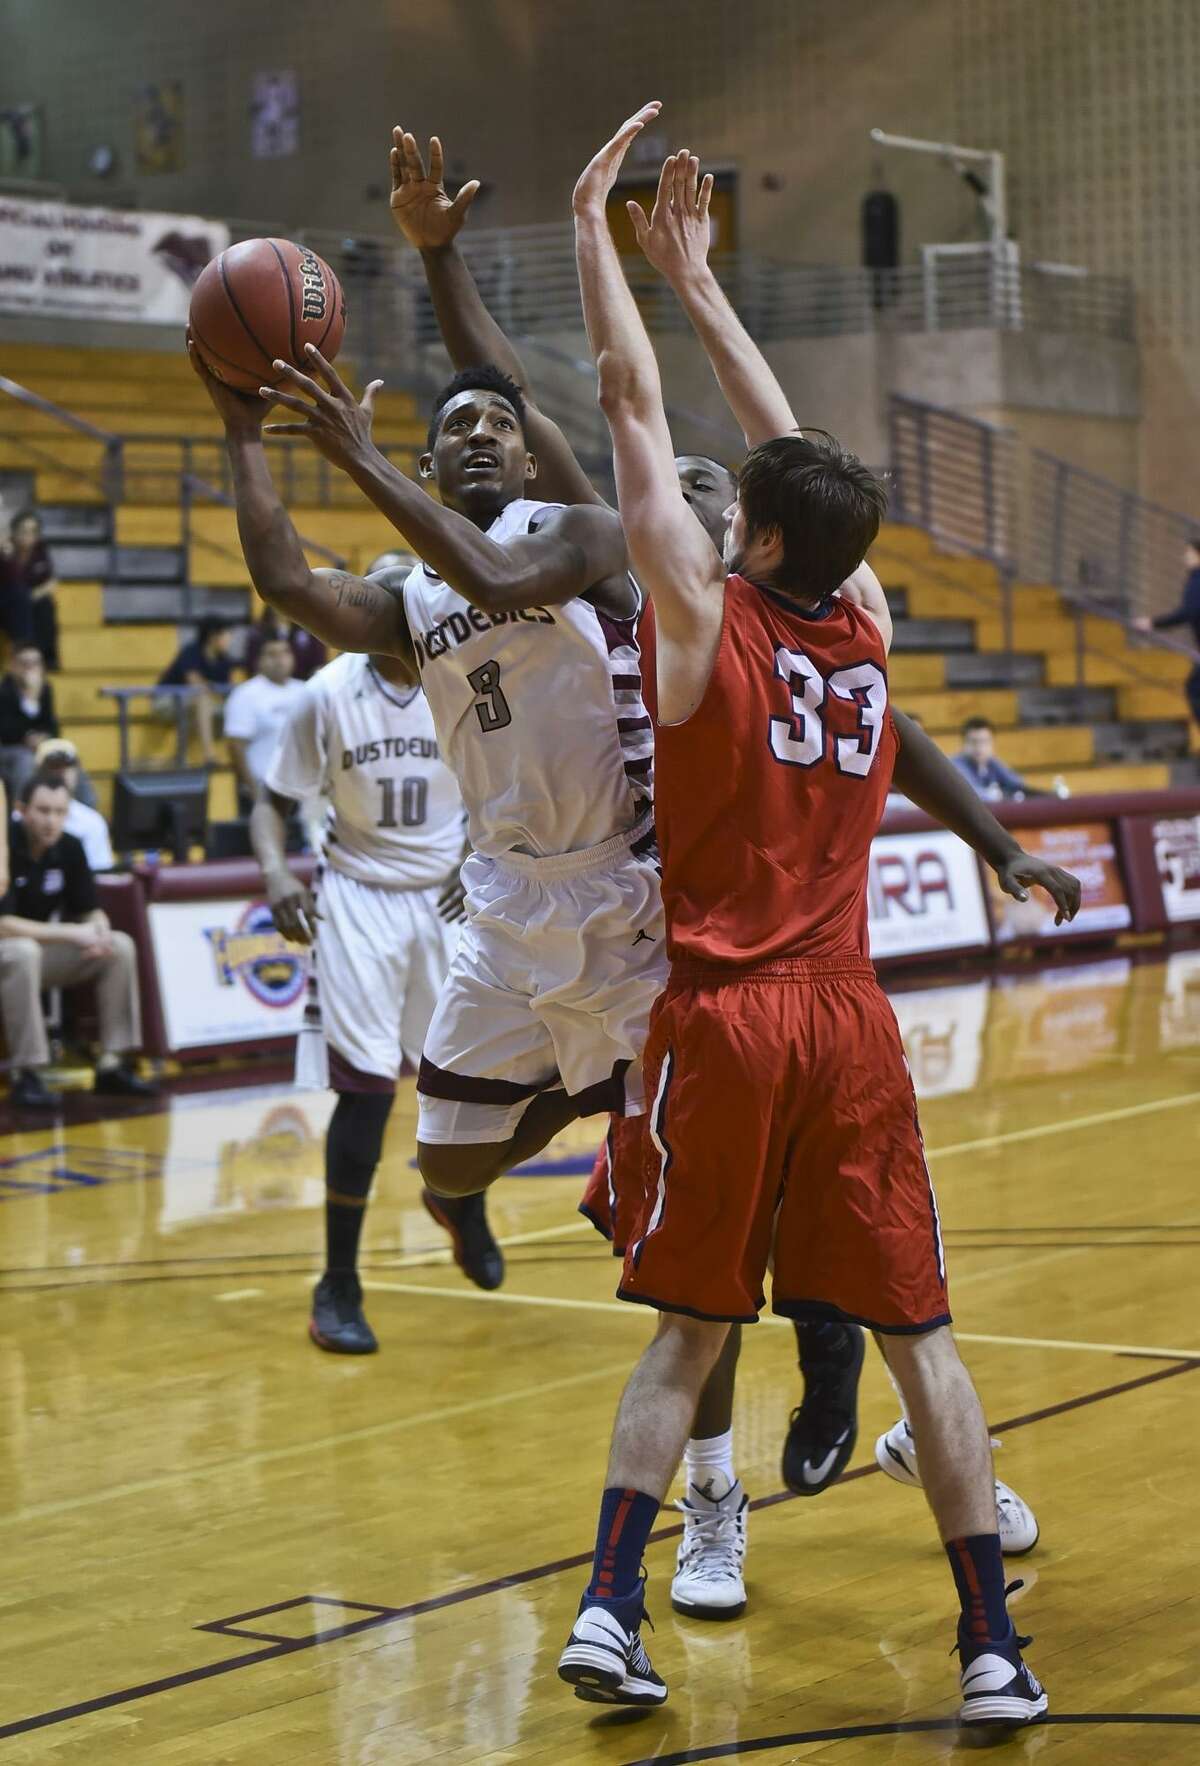 Anthony Alston averaged 11.5 points in 57 games over two seasons with the Dustdevils.